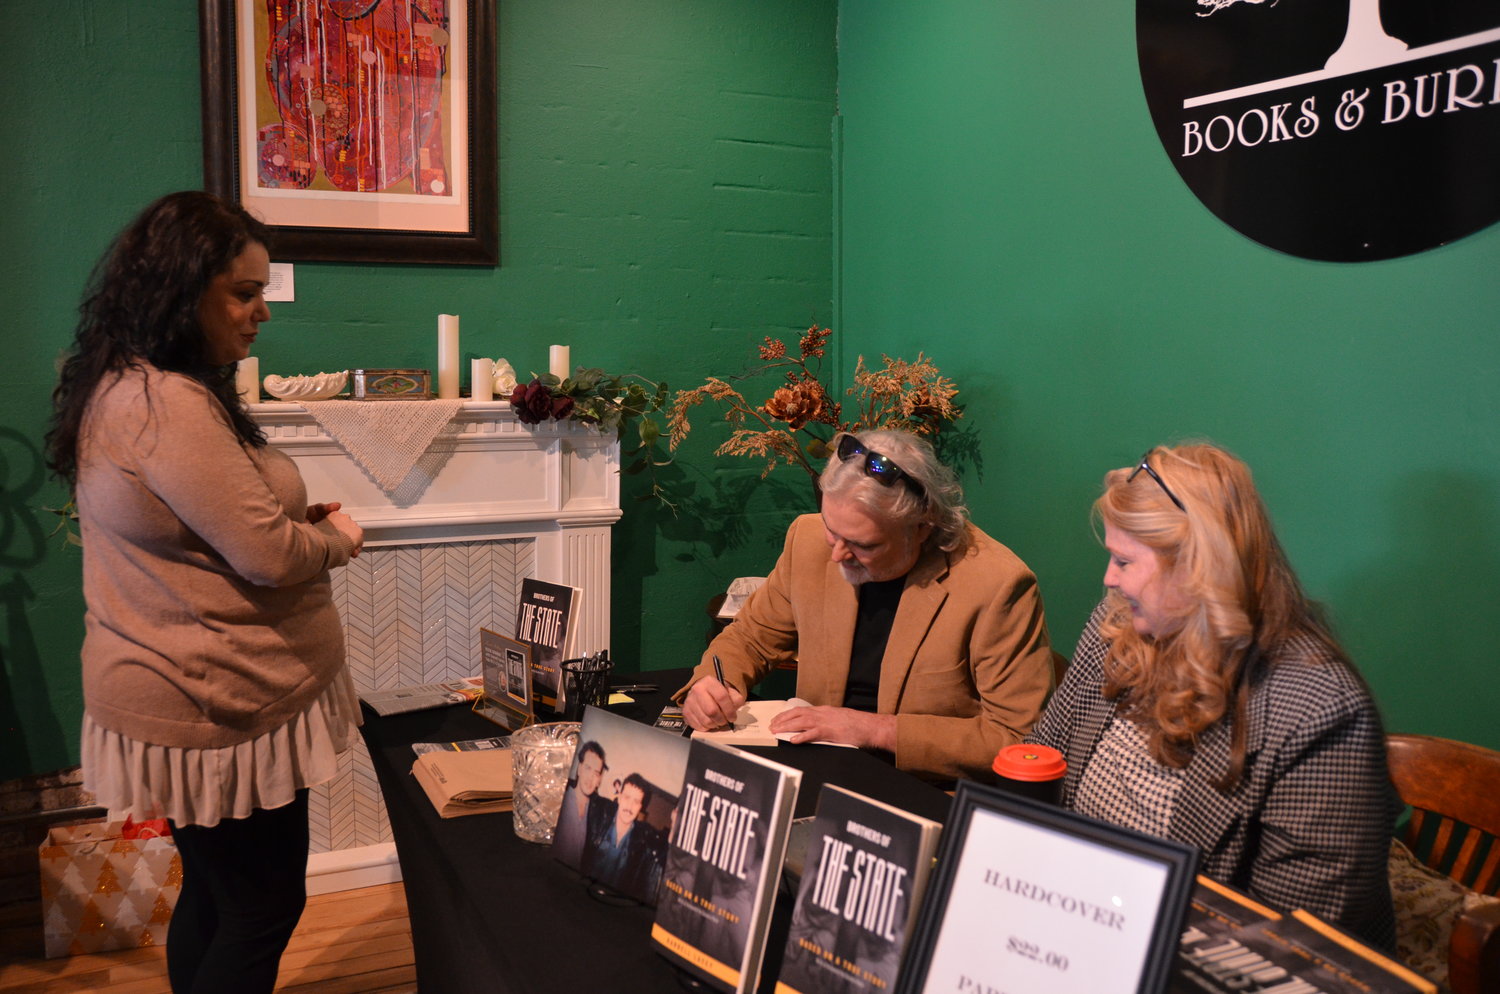 From left, Maria McDonald gets a book, “Brothers of the State,” signed by Darrell Lacey during his “meet the author” event with the support of Karla Highfill at Books and Burrow on Saturday afternoon. Lacey’s book tells the story of three brothers who were taken into a foster home and the horrors they experienced.